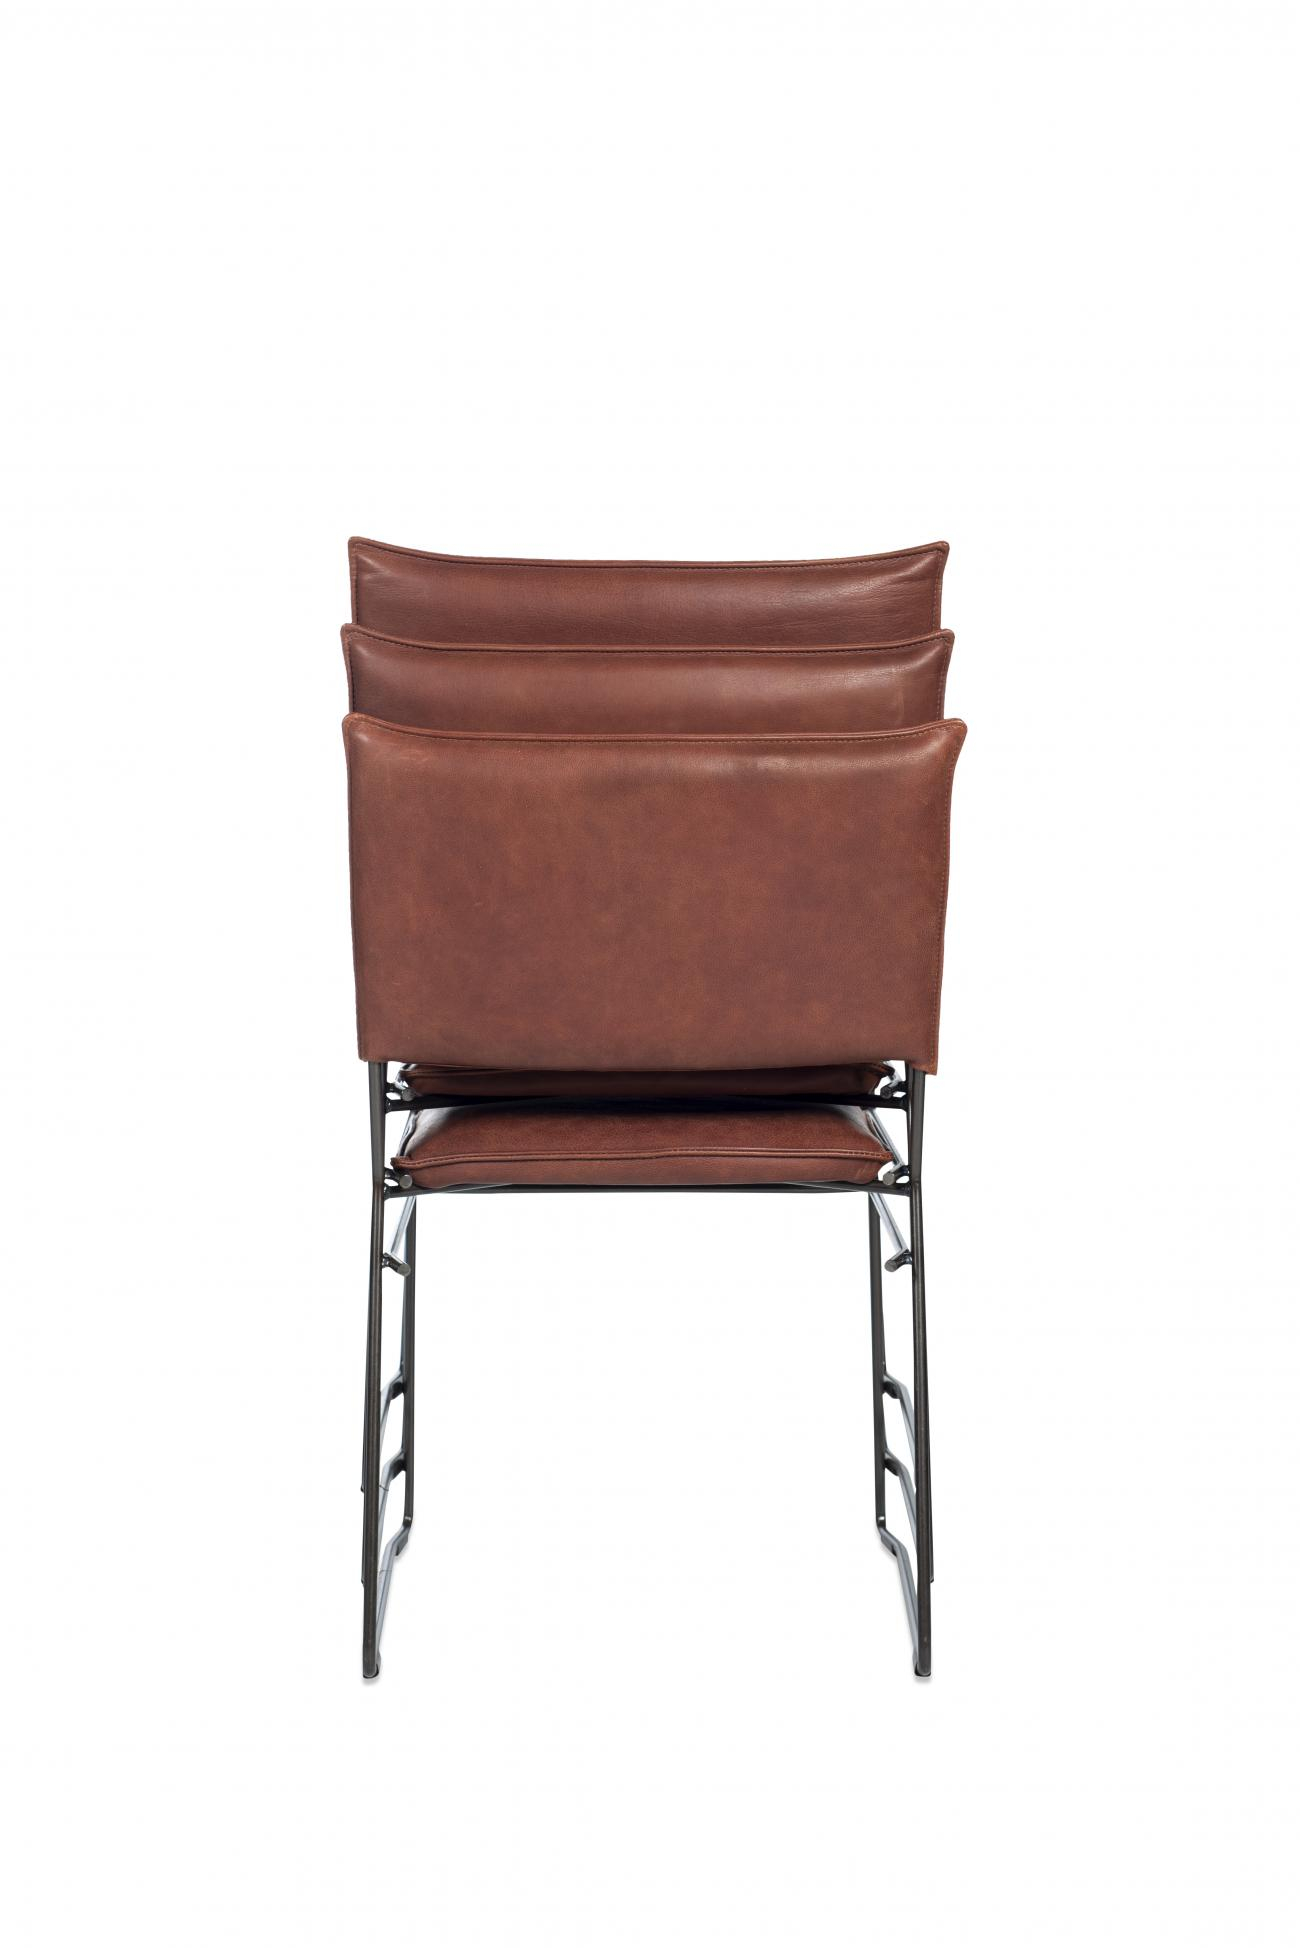 https://www.fundesign.nl/media/catalog/product/n/o/norman_dining_chair_old_glory_stackable_bonanza_british_tan_back.jpg